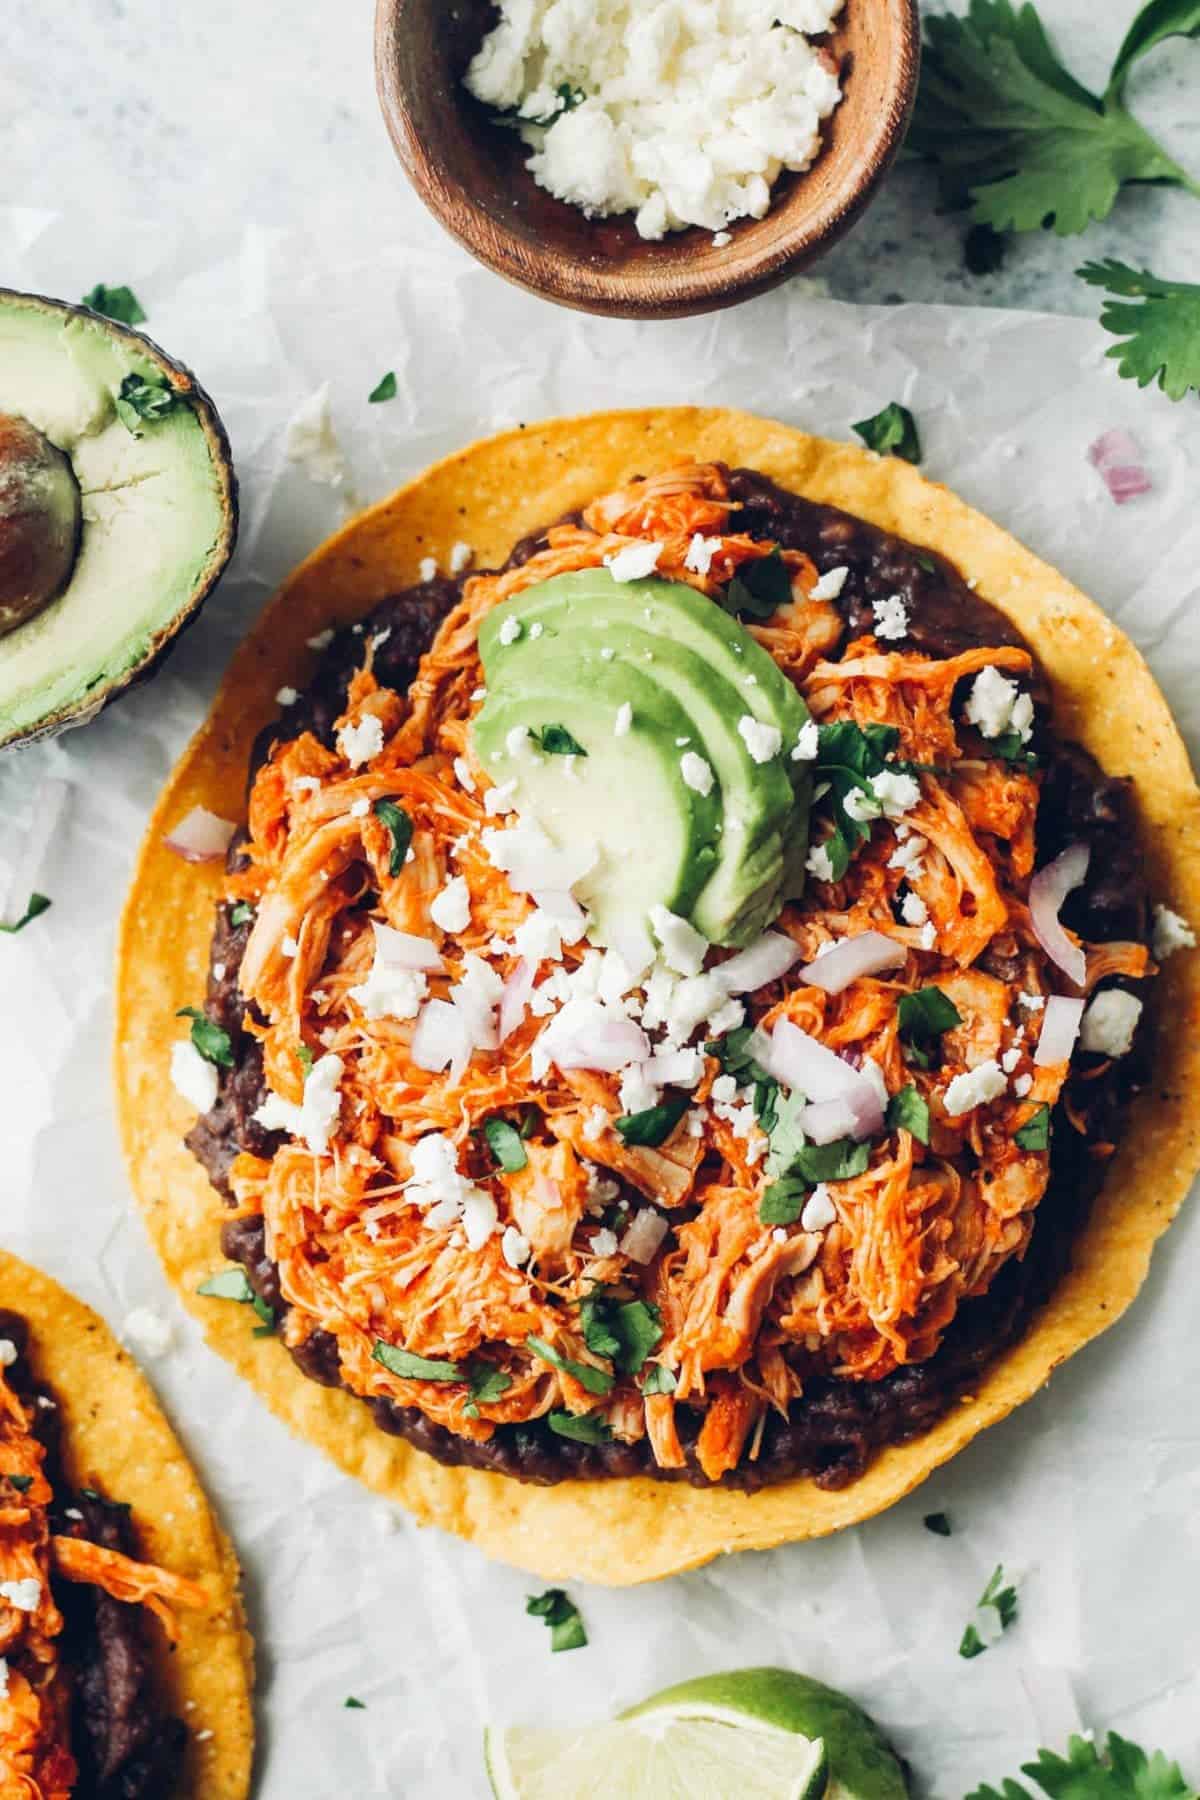 Chicken tinga served in a tostada with toppings